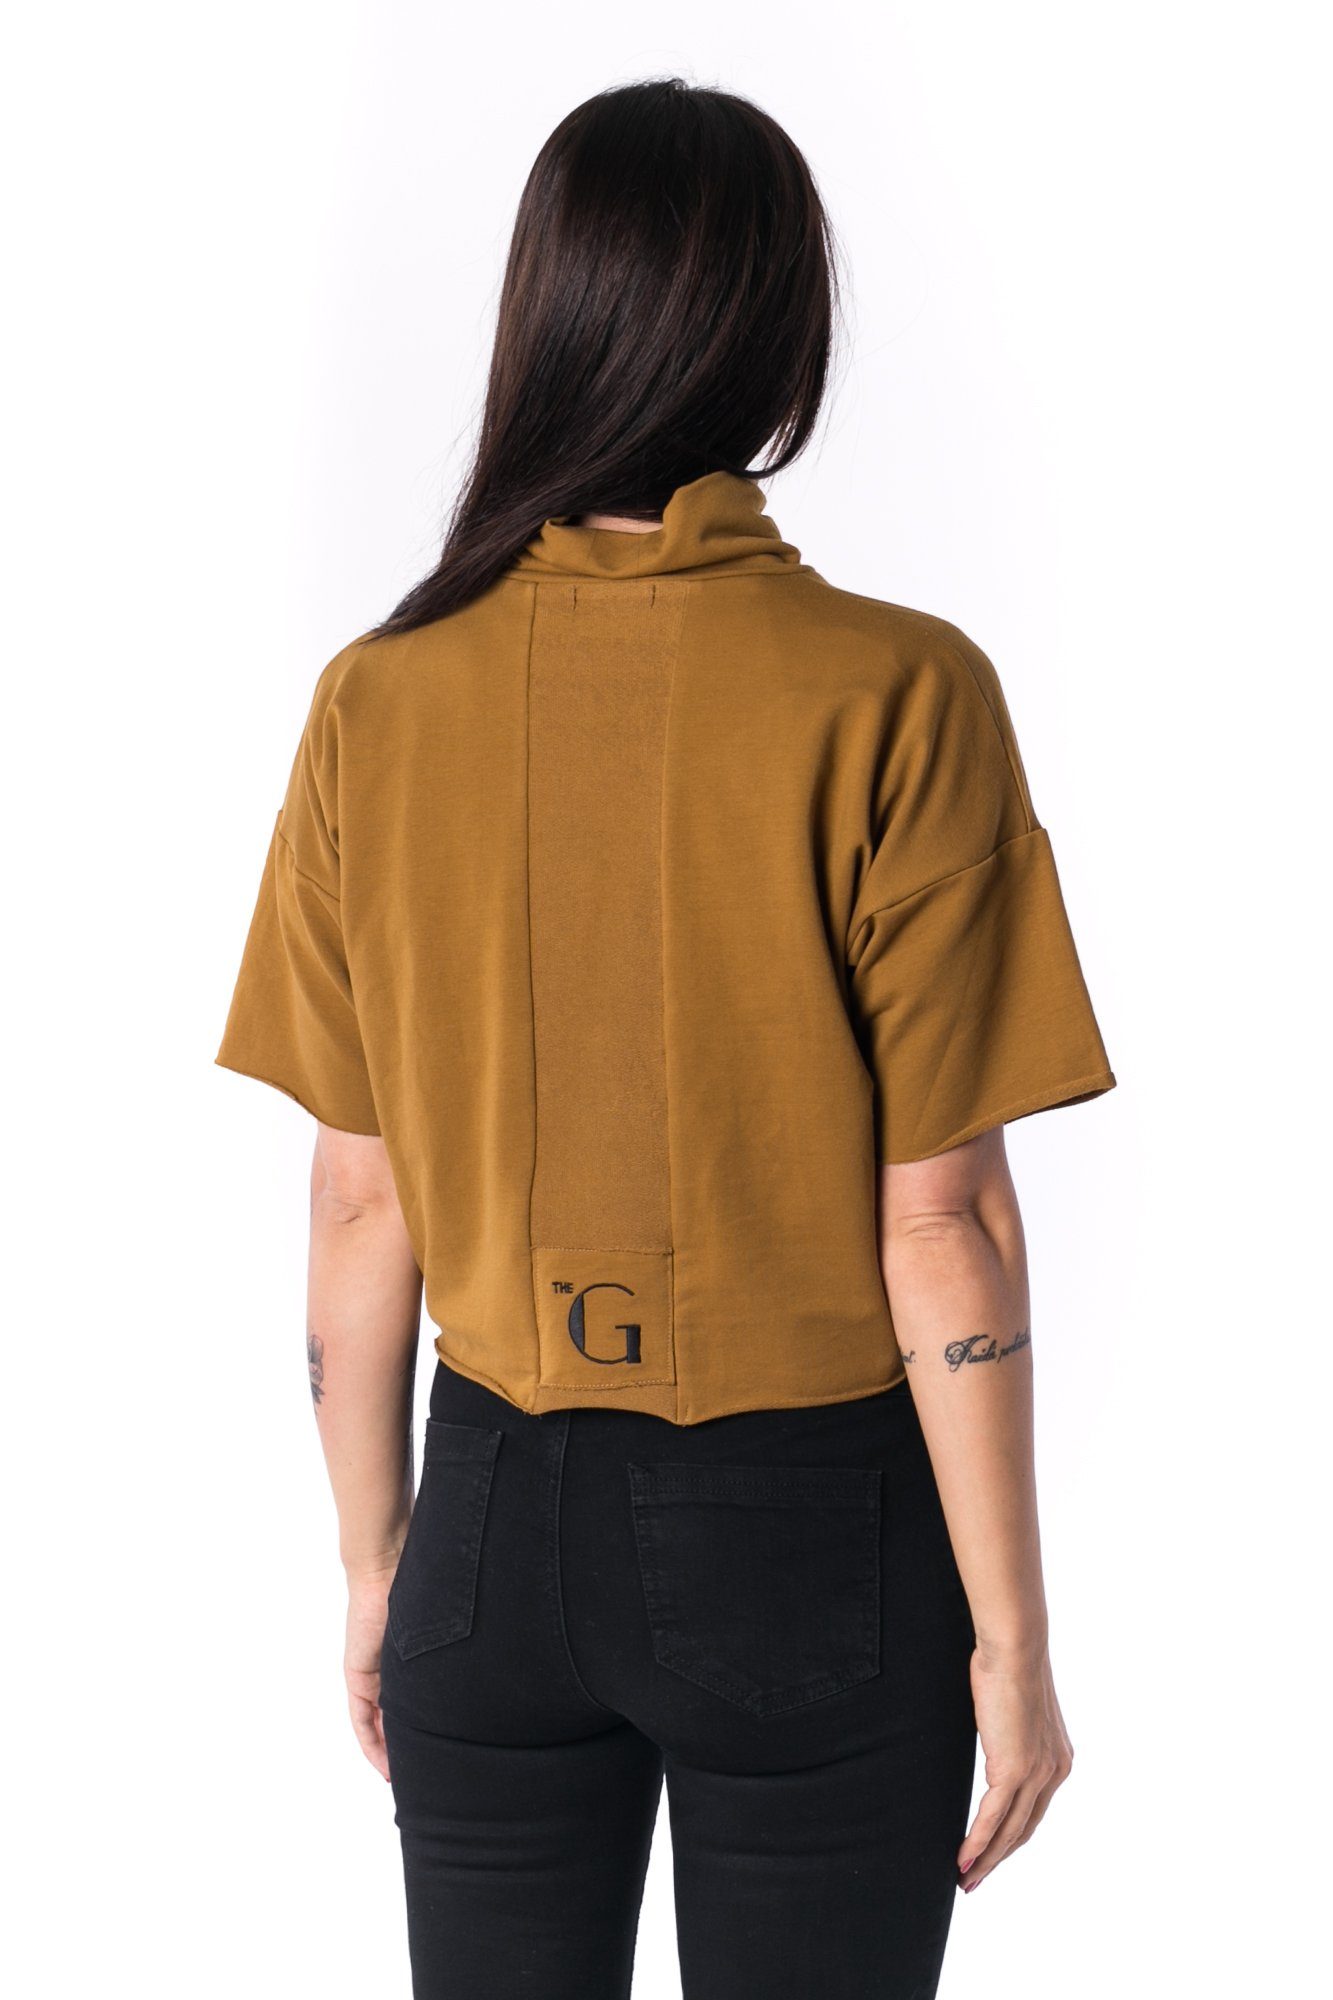 The Woman Panelled Crop Turtleneck 17 // umber